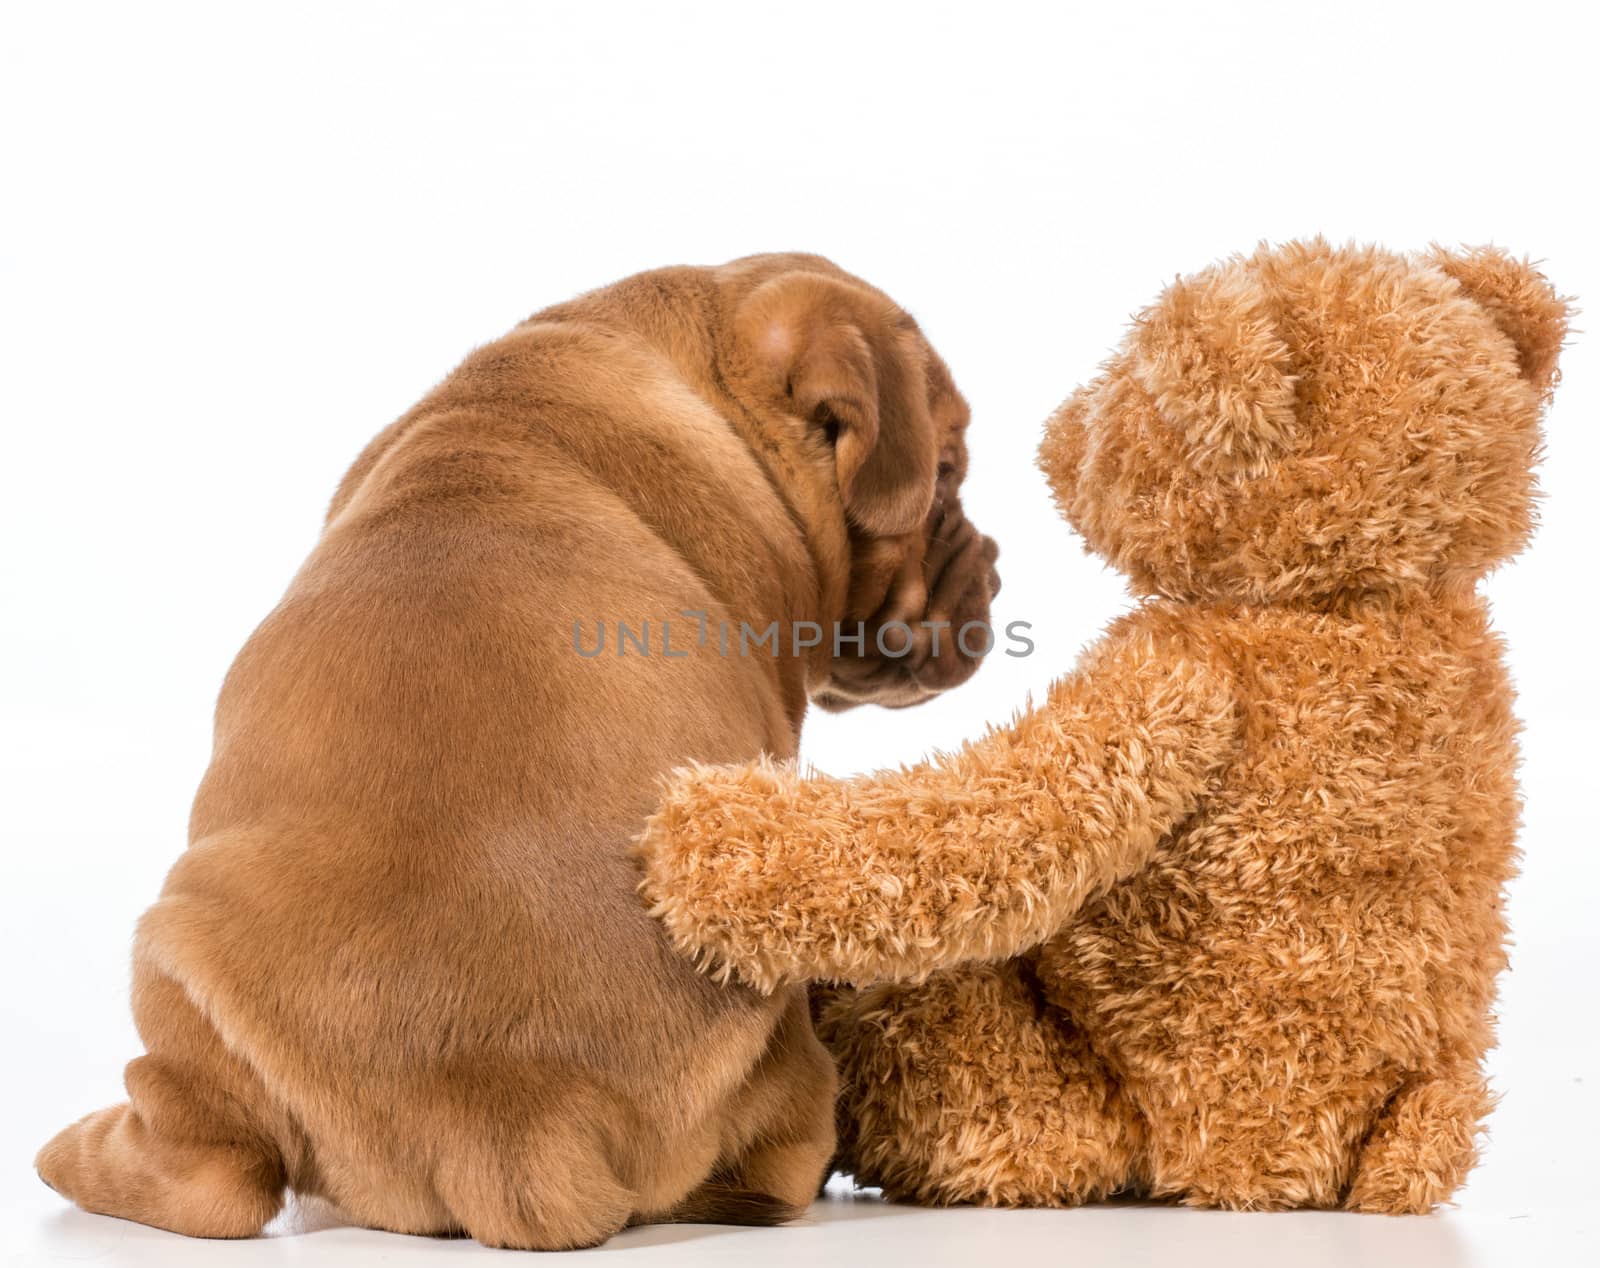 best friends - dog and teddy bear with arms around each other